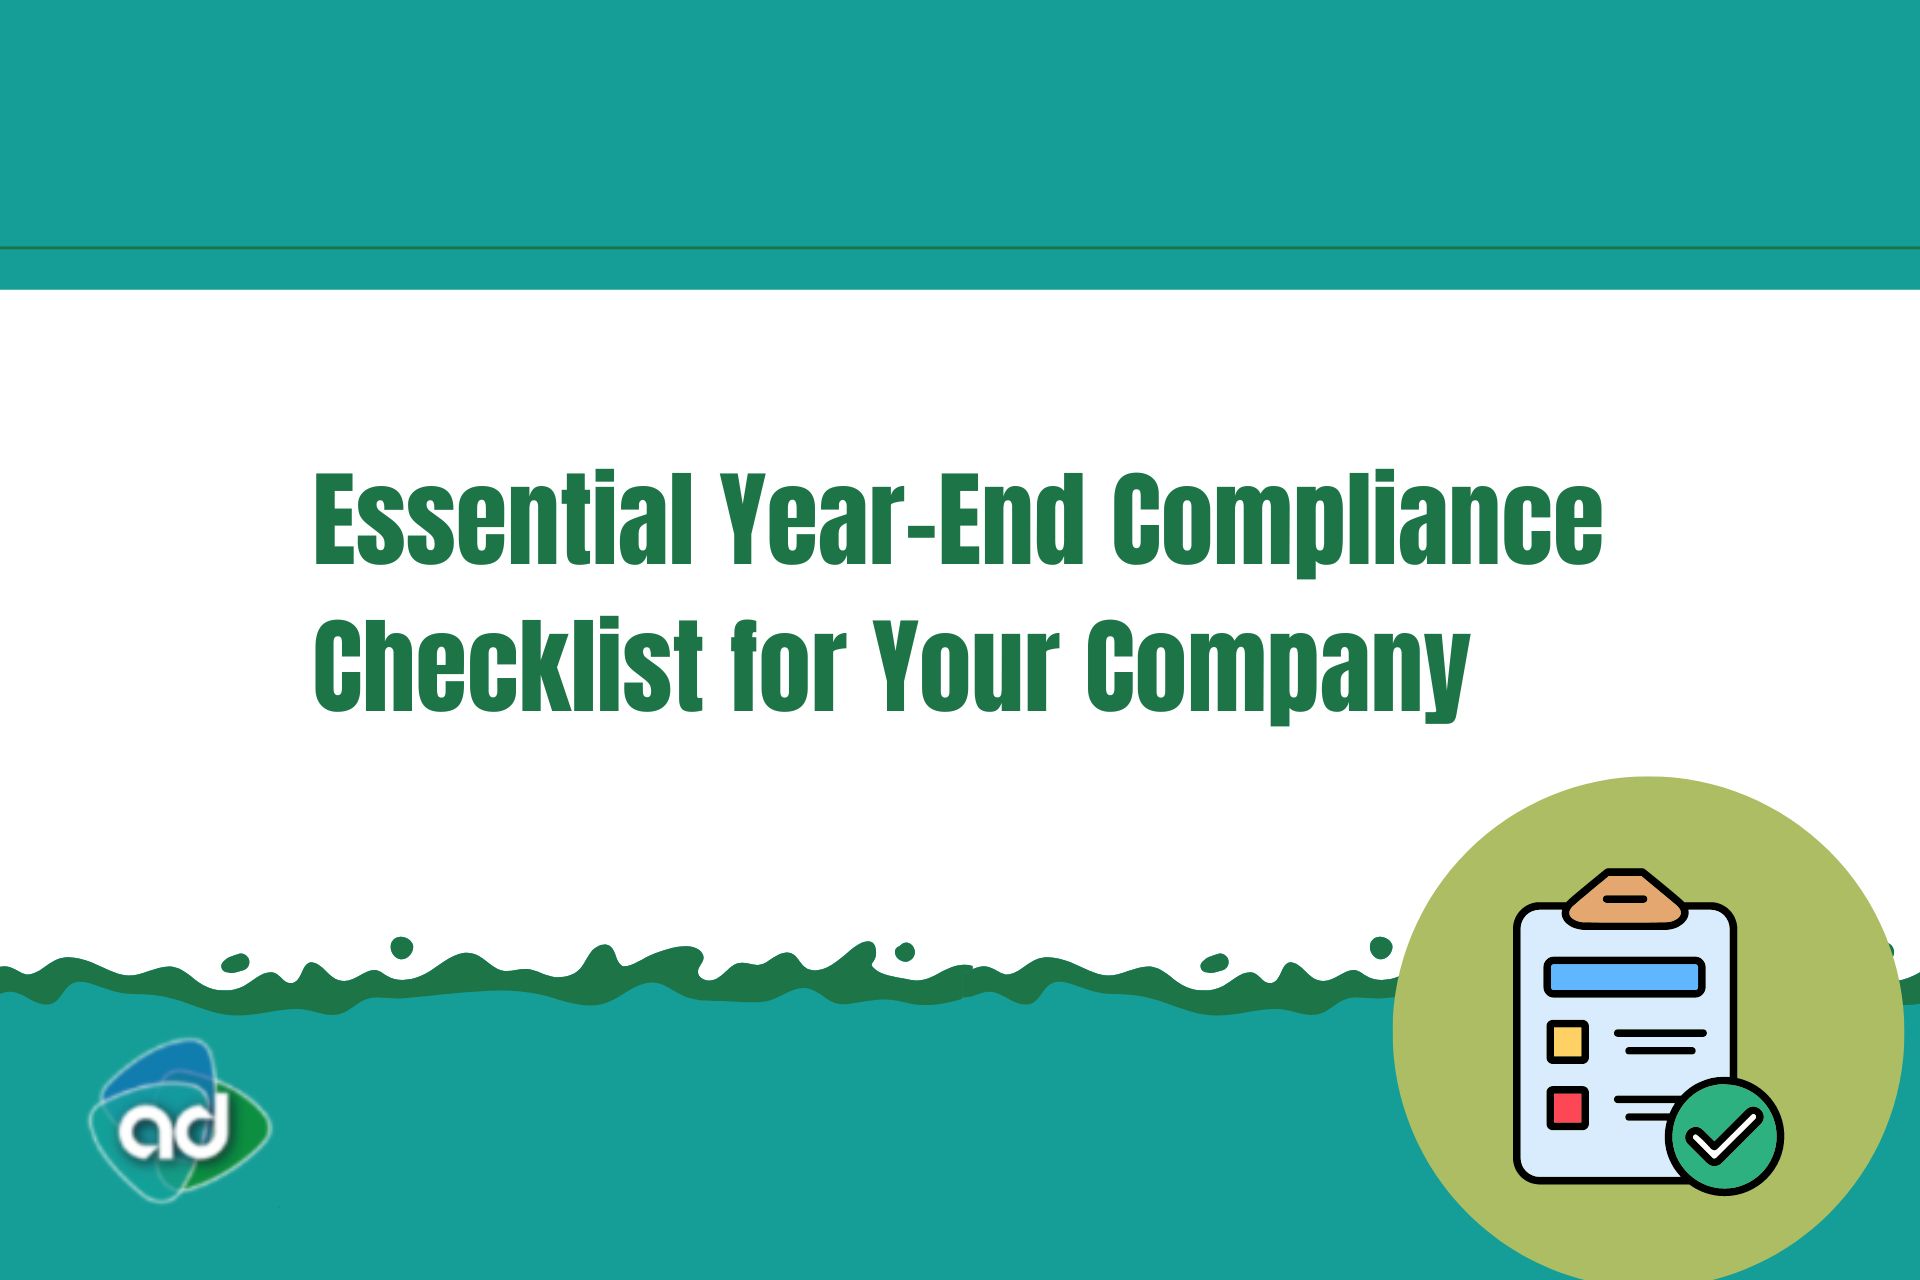 Essential Year-End Compliance Checklist for Your Company